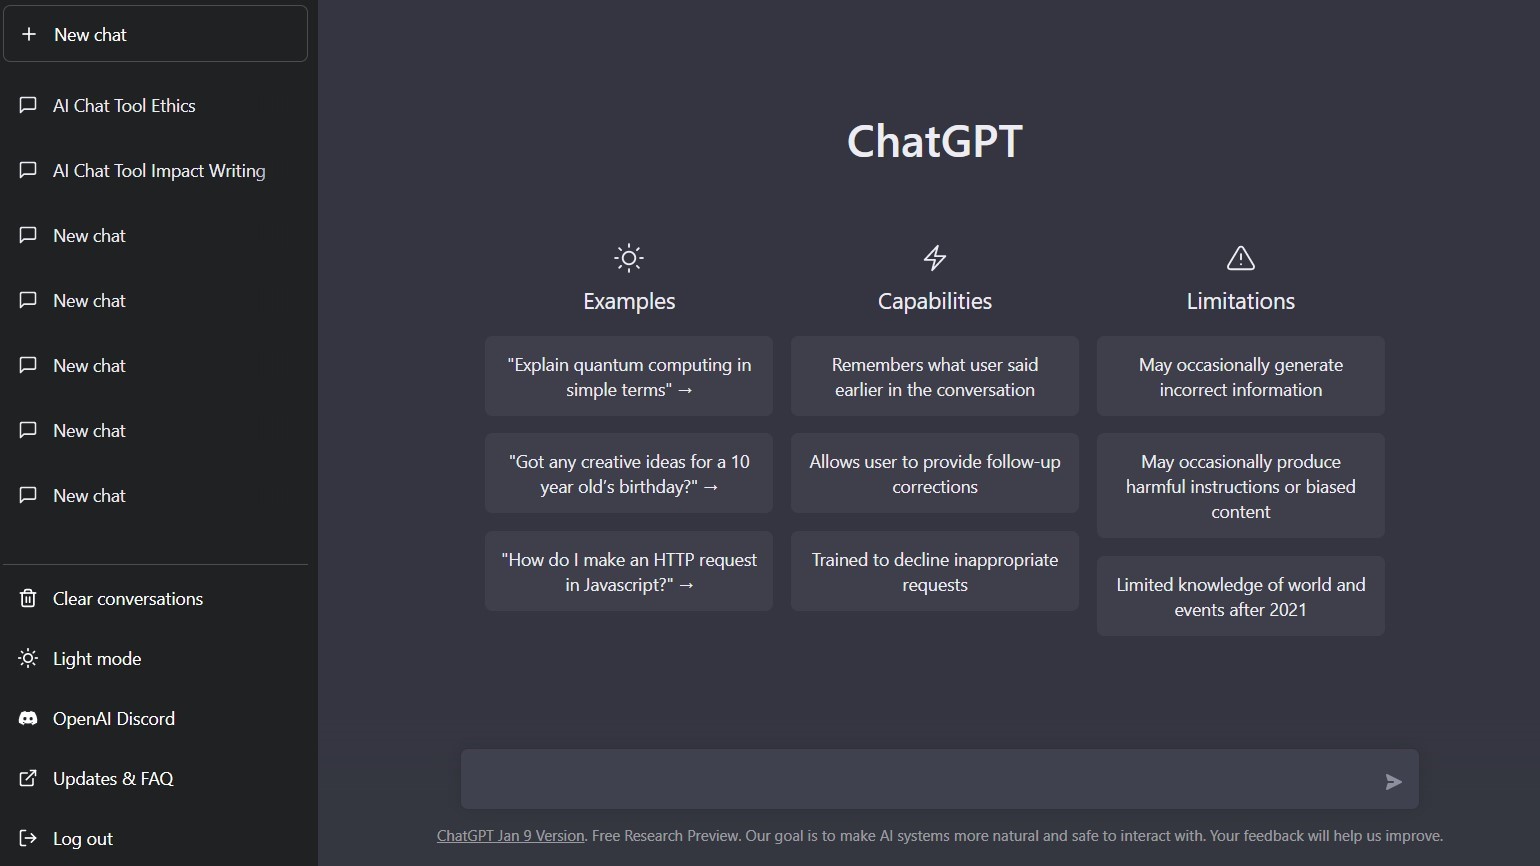 History of People's Conversations on ChatGPT Revealed by Bug : TechMoran